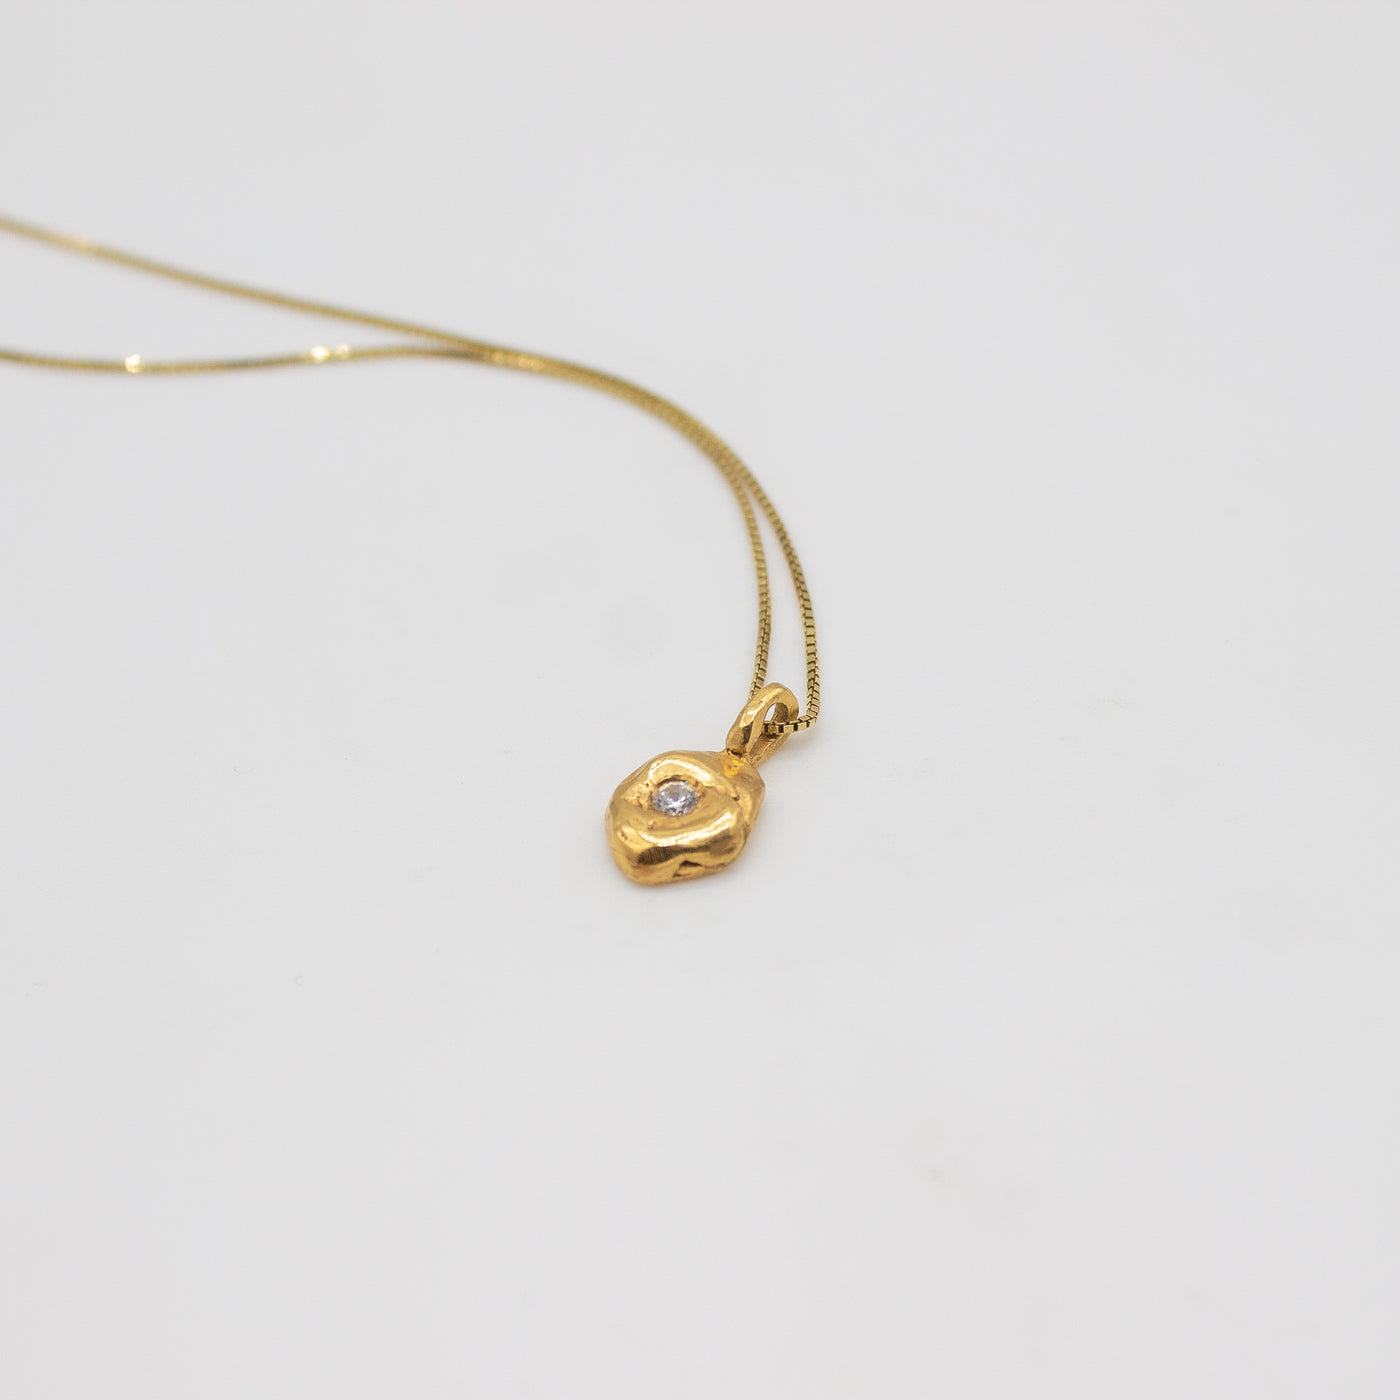 LÆRDAL // Necklace with delicate pendant gold-plated with zirconia stone 